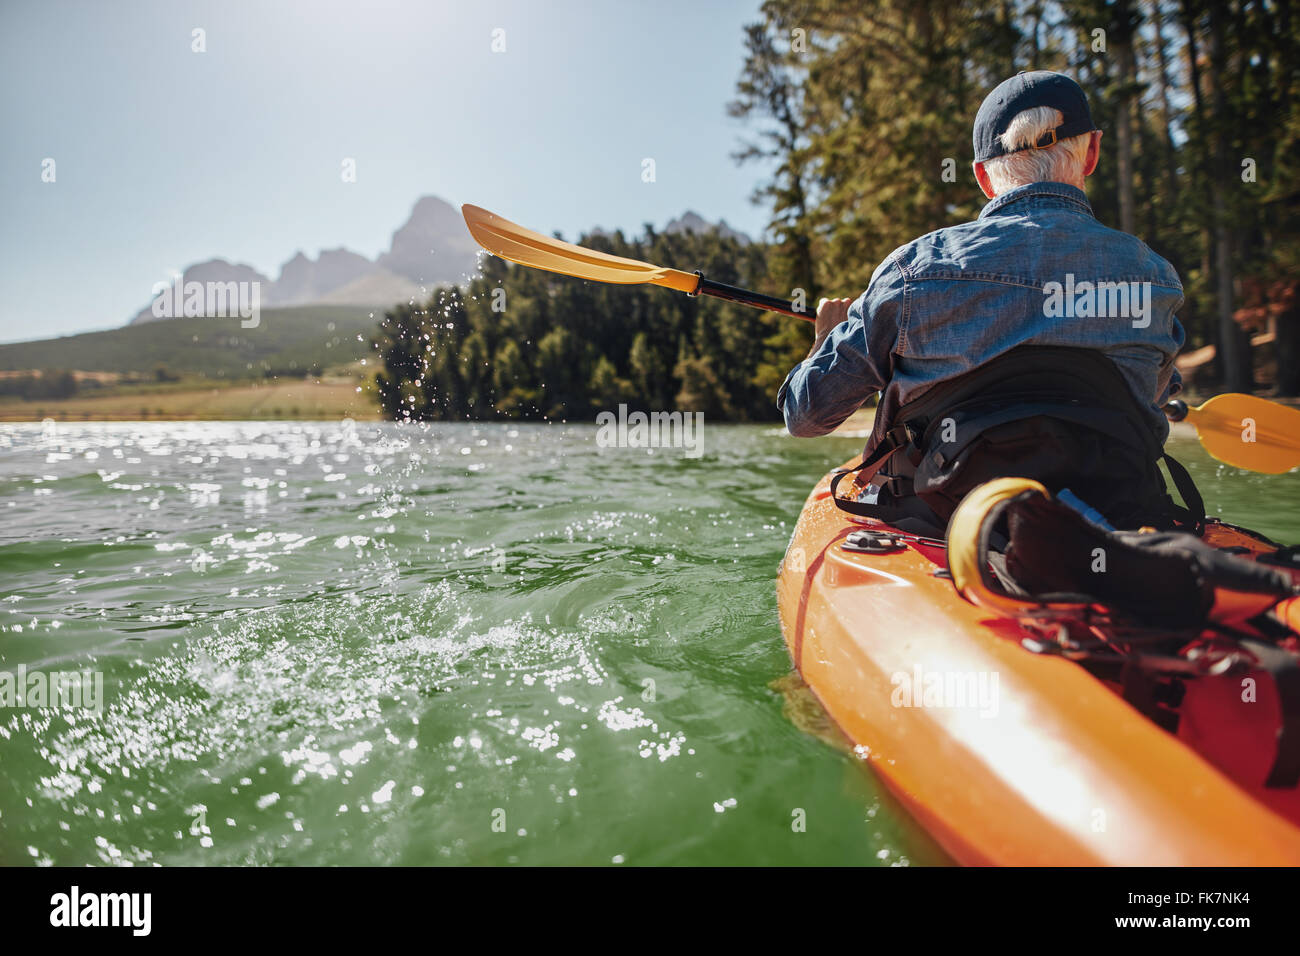 Rear view image of a man canoeing in a lake. Man paddling a kayak on summer day. Stock Photo